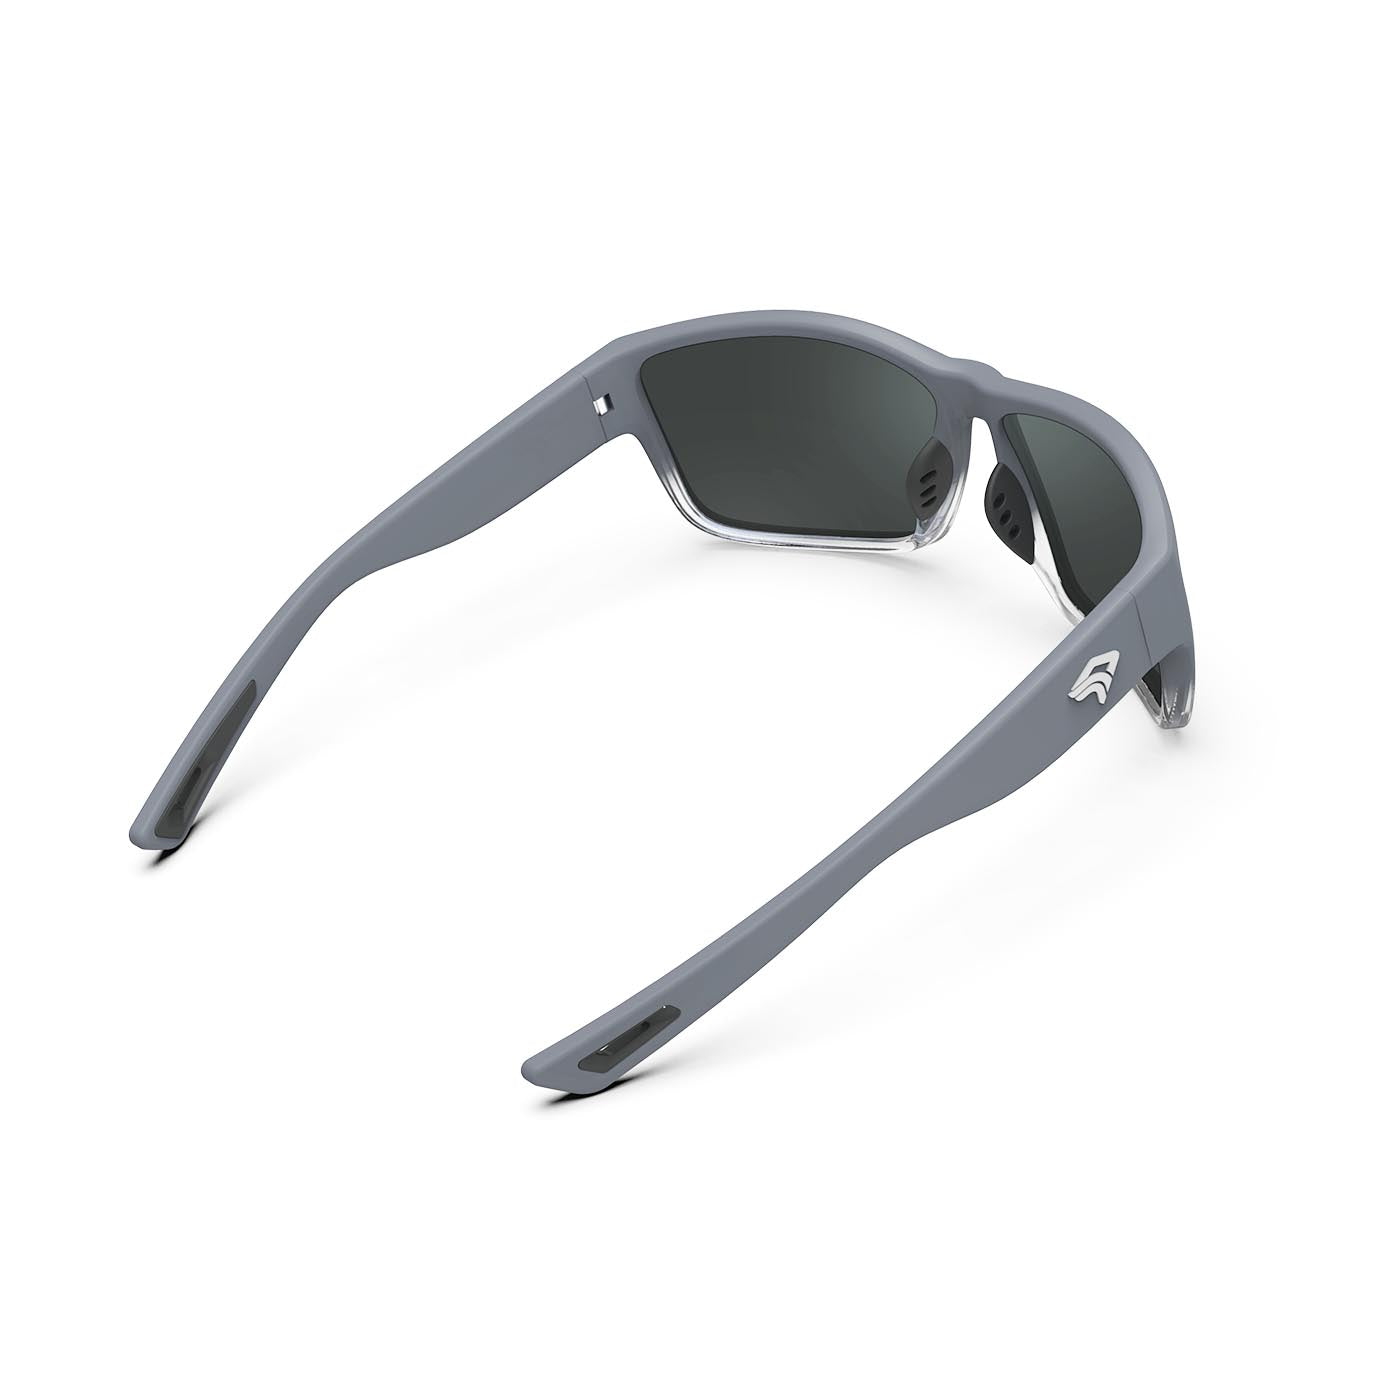 Torege 'Pure' Polarized Sports Sunglasses with Lifetime Warranty - Flexible Frame for Men and Women - Ideal for Cycling, Running, Golf, and Fishing